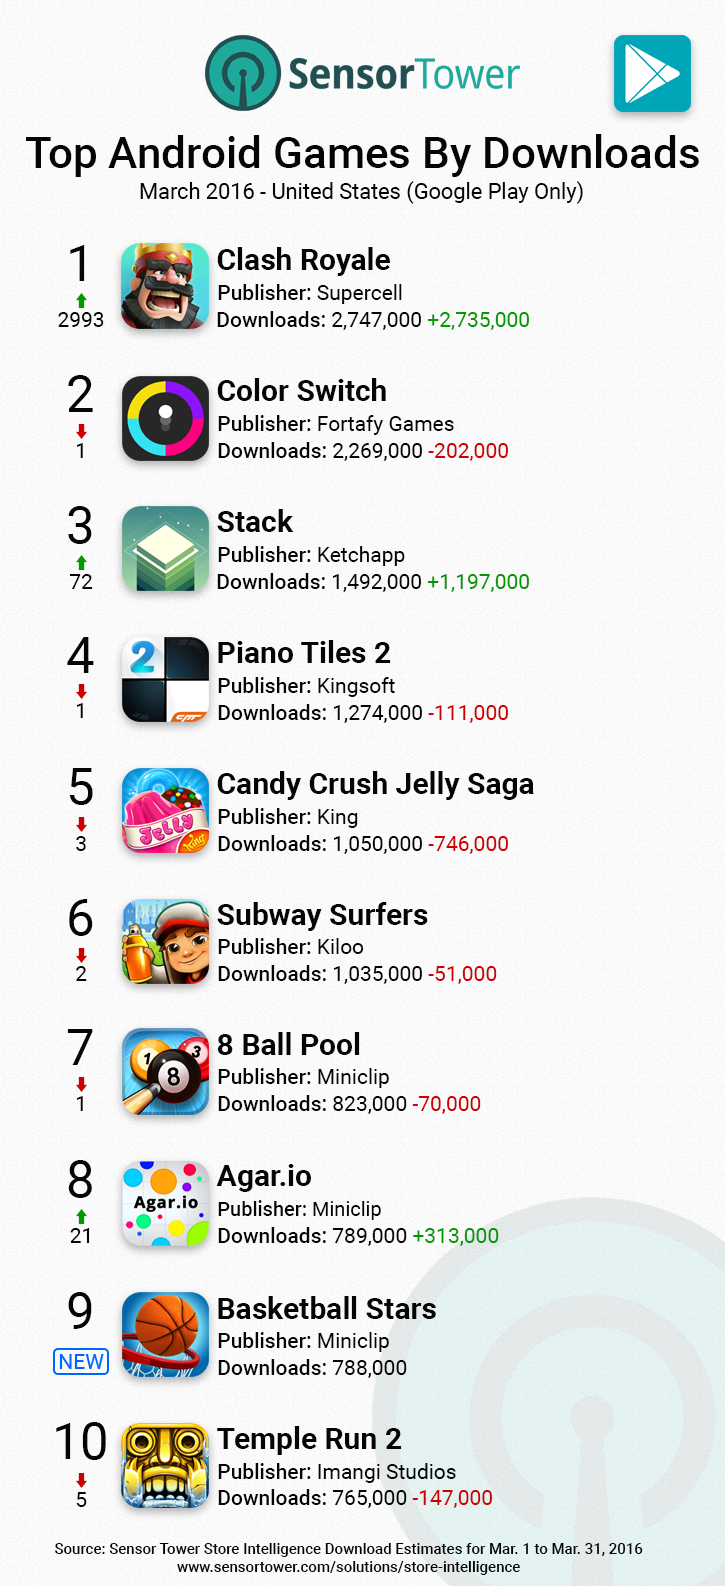 Google Play Games Top Downloads United States March 2016